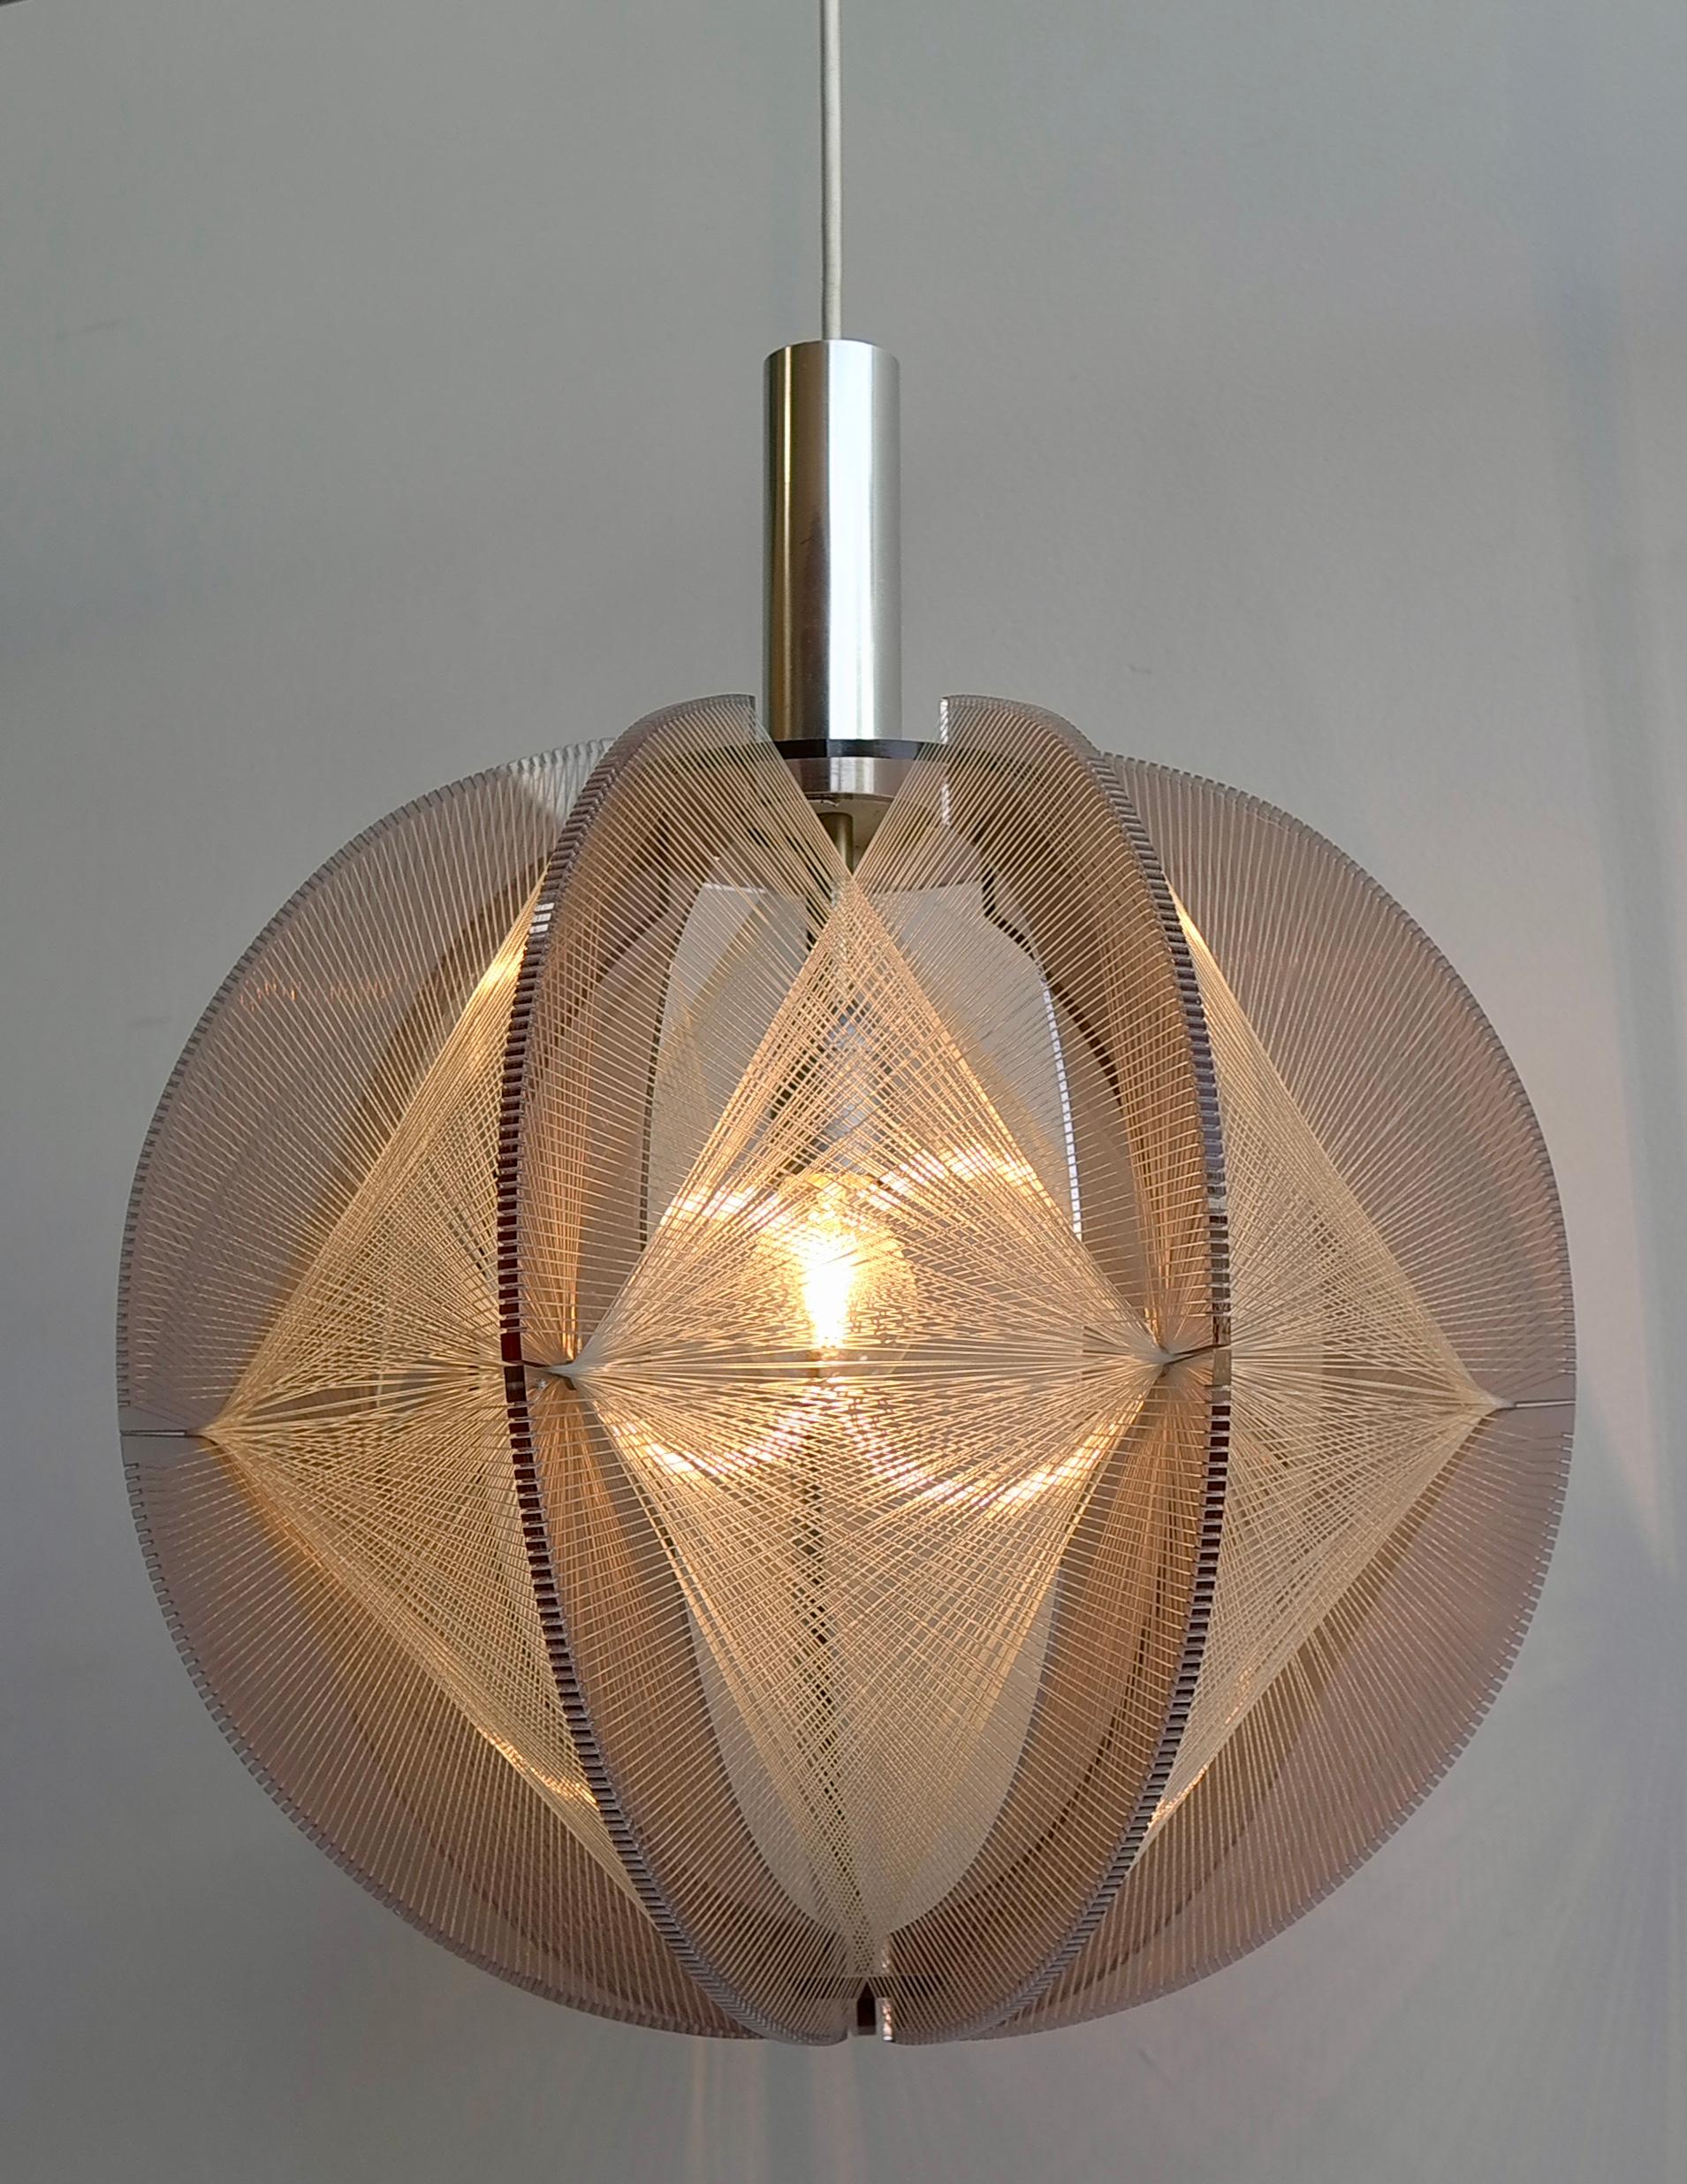 Cler Purple wire pendant lamp by Paul Secon for Sompex, 1970s

Pendant lamp is made of clear/purple Lucite with woven strings surrounding the lightbulb, gives a warm light when lit.